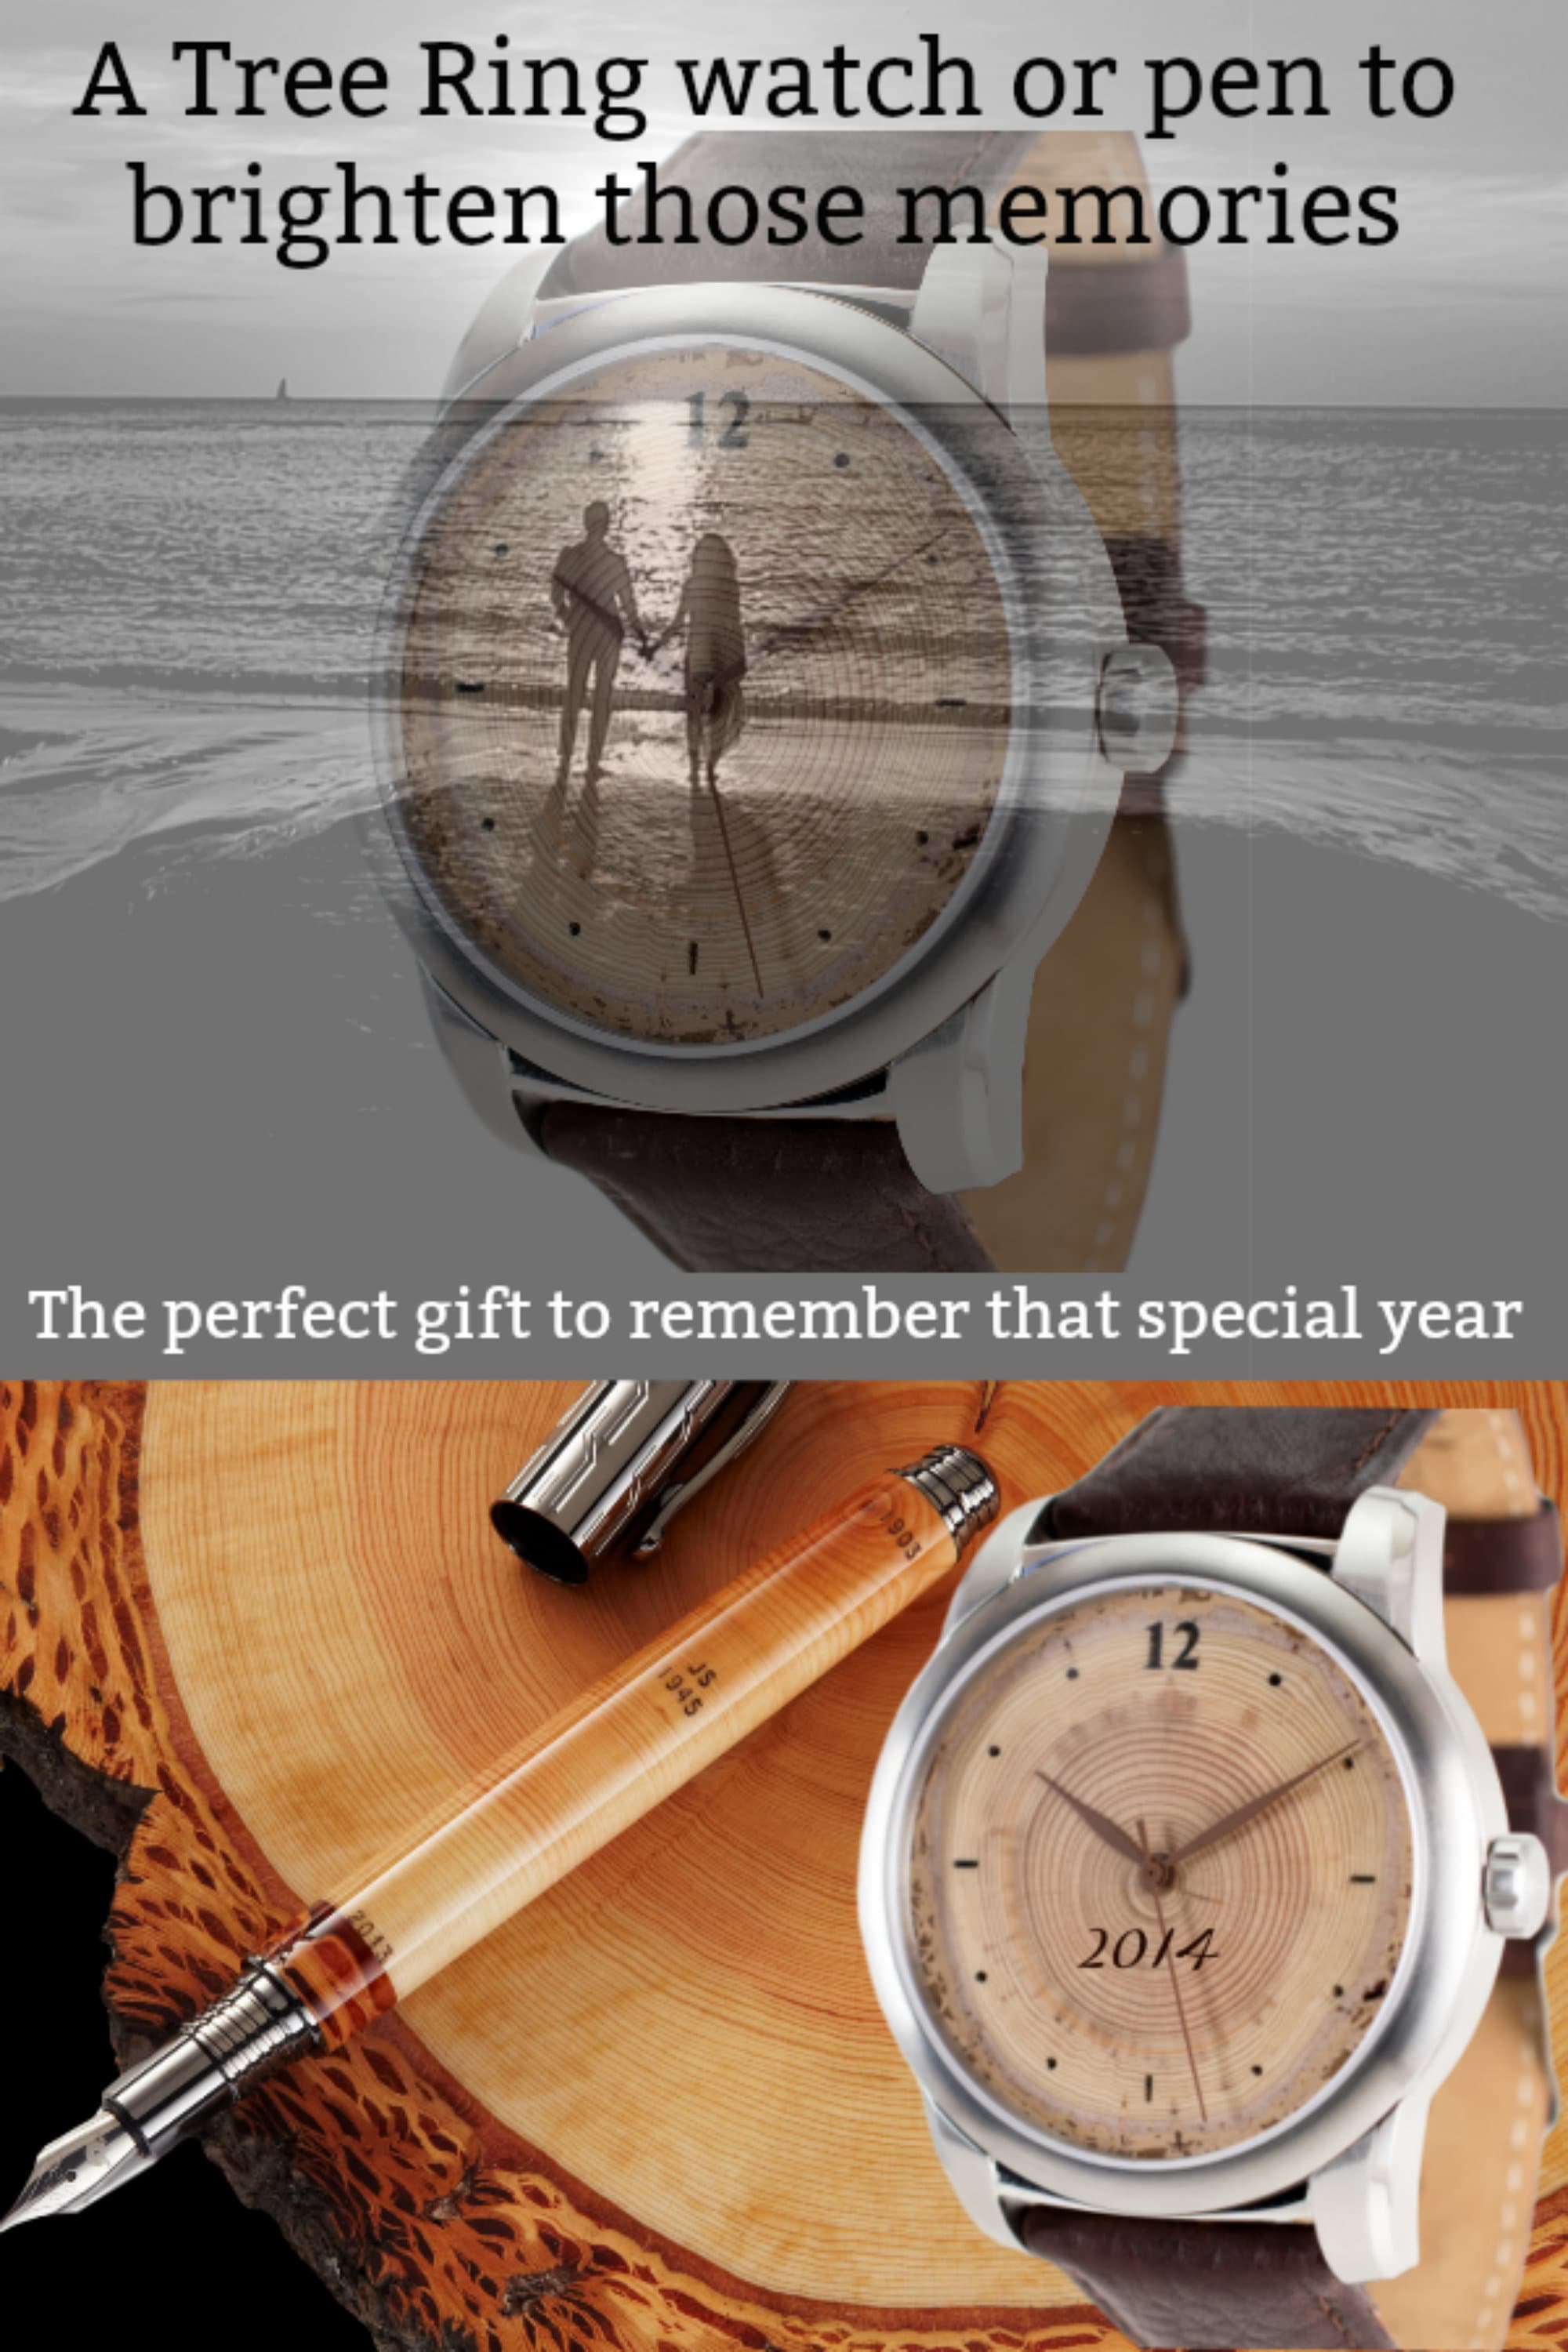 Watch Made of Tree Rings, 30th Wedding Anniversary Gift, 30th Anniversary Gift for Parents, pearl Anniversary Gift, 30th birthday gift, year